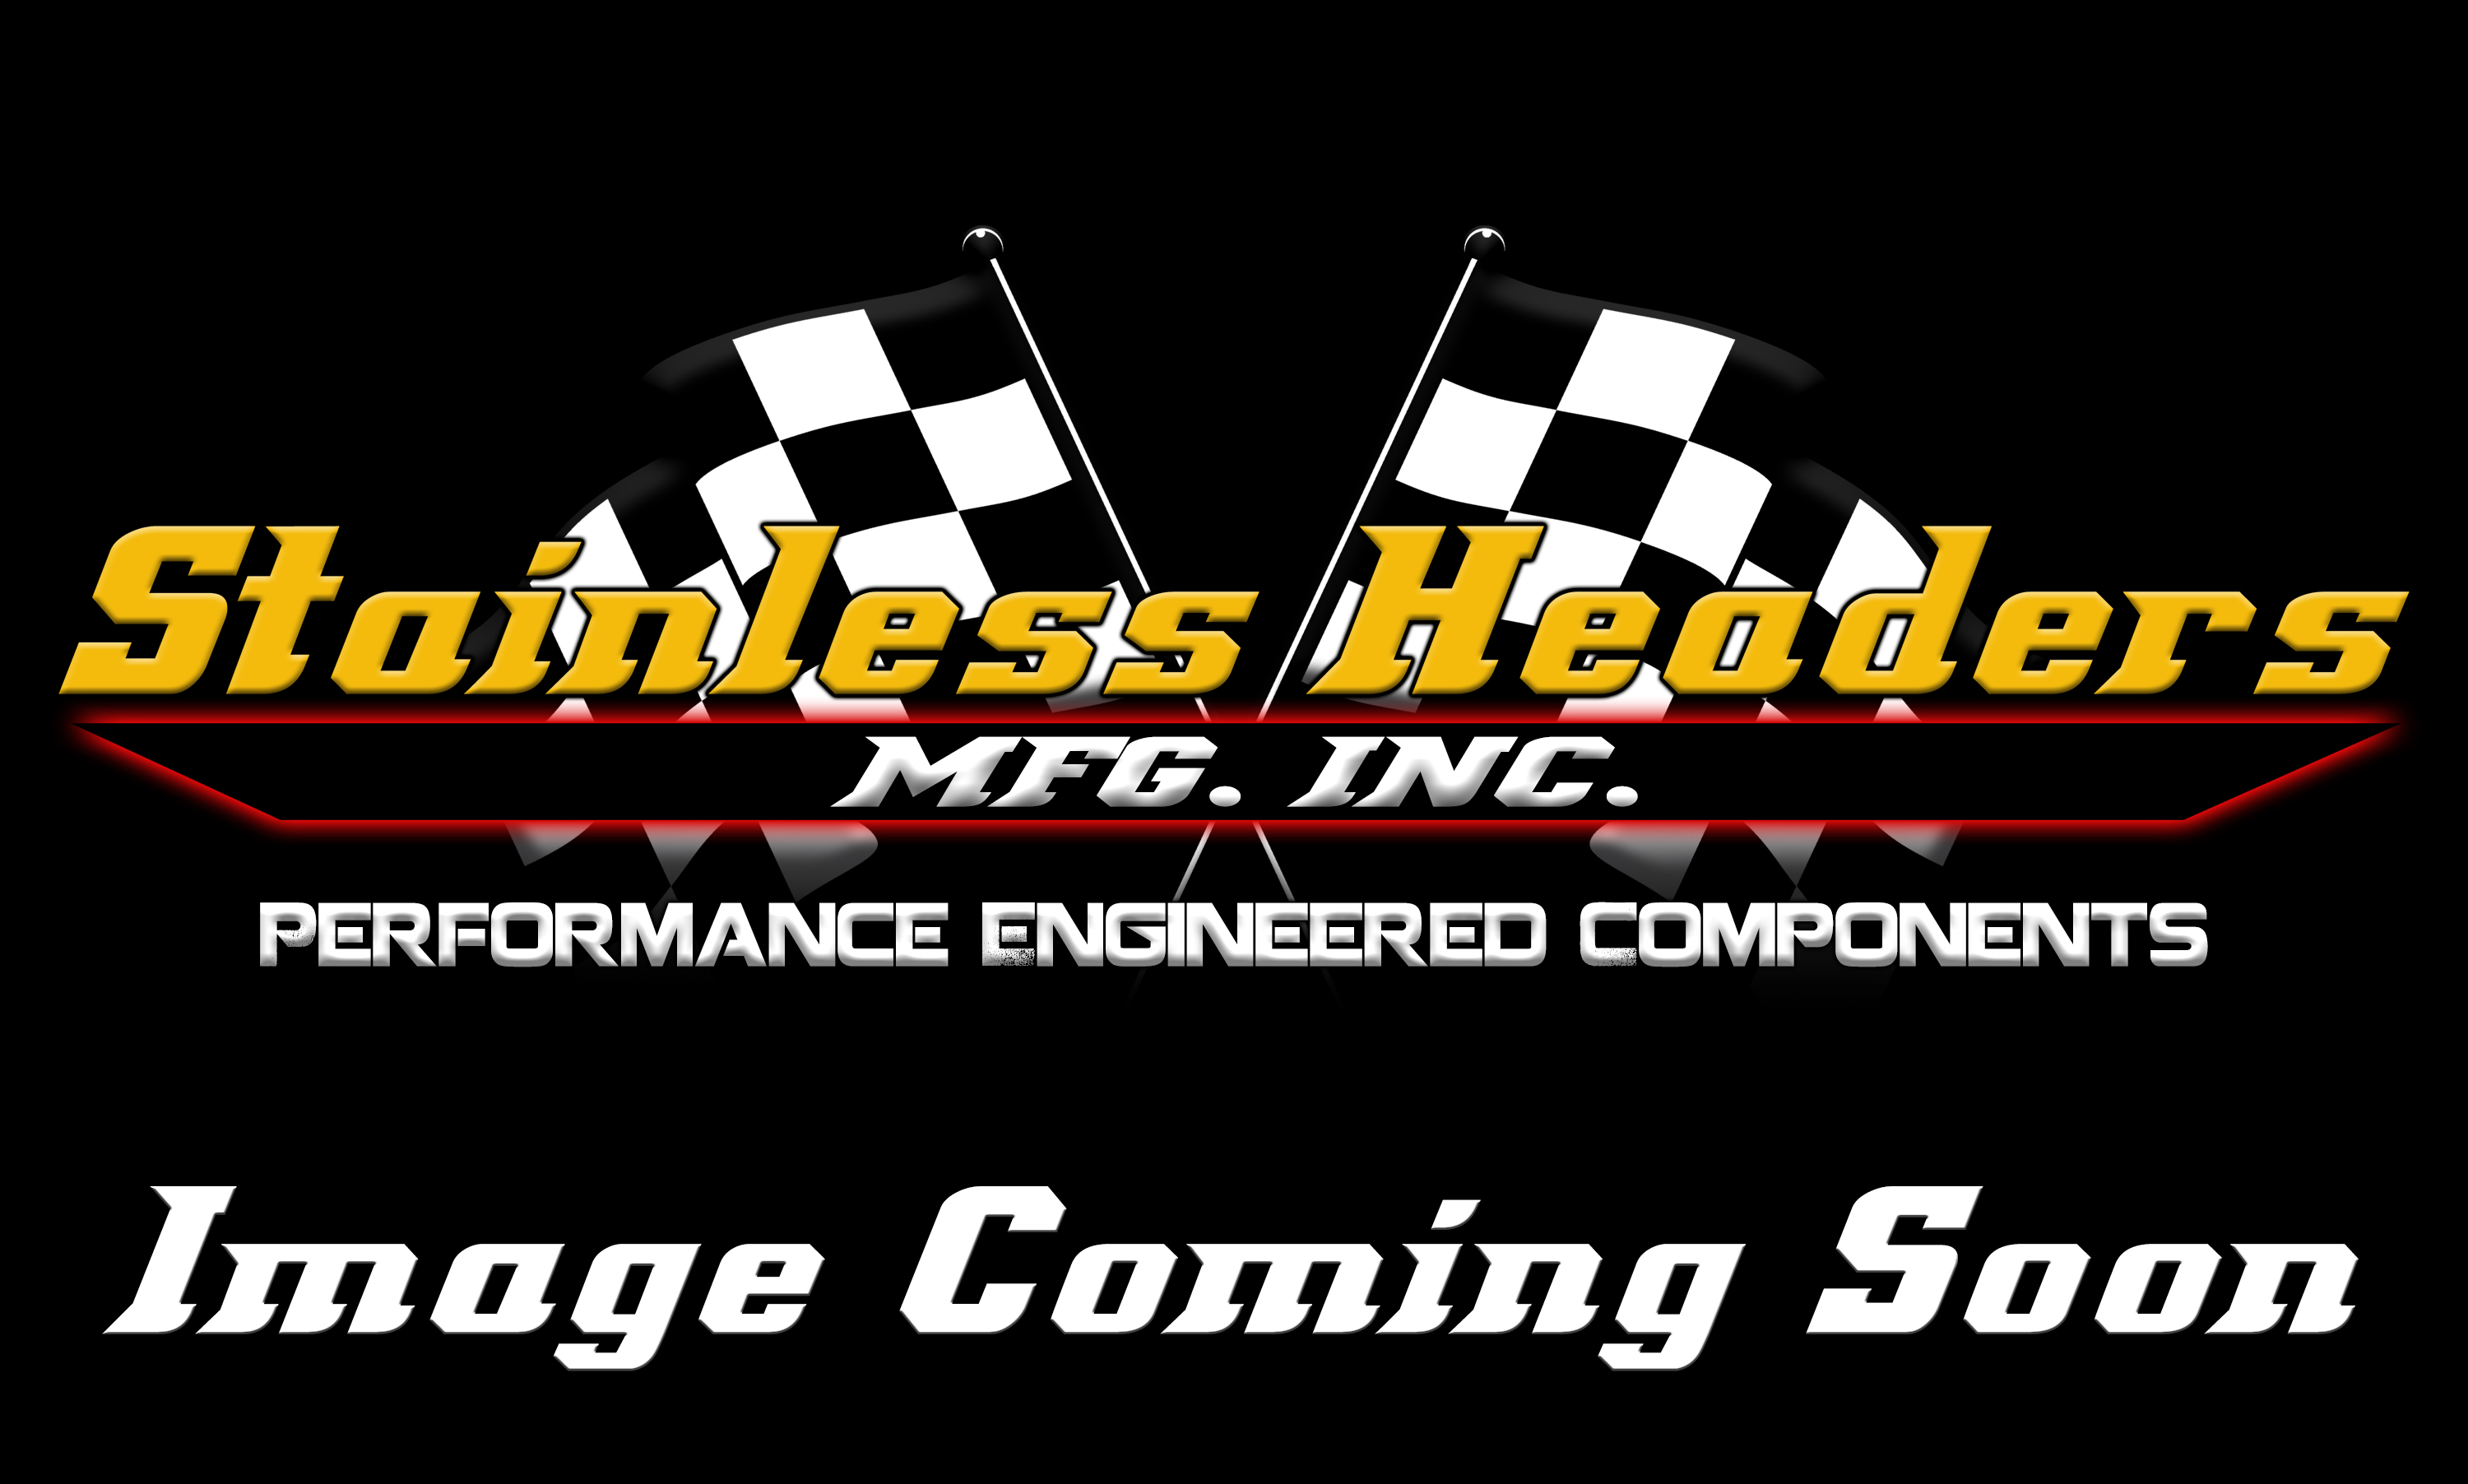 CompTurbo Technologies - CTR4204R-7490 Mid Frame Oil-Less 3.0 Turbocharger (1300 HP) - Image 3